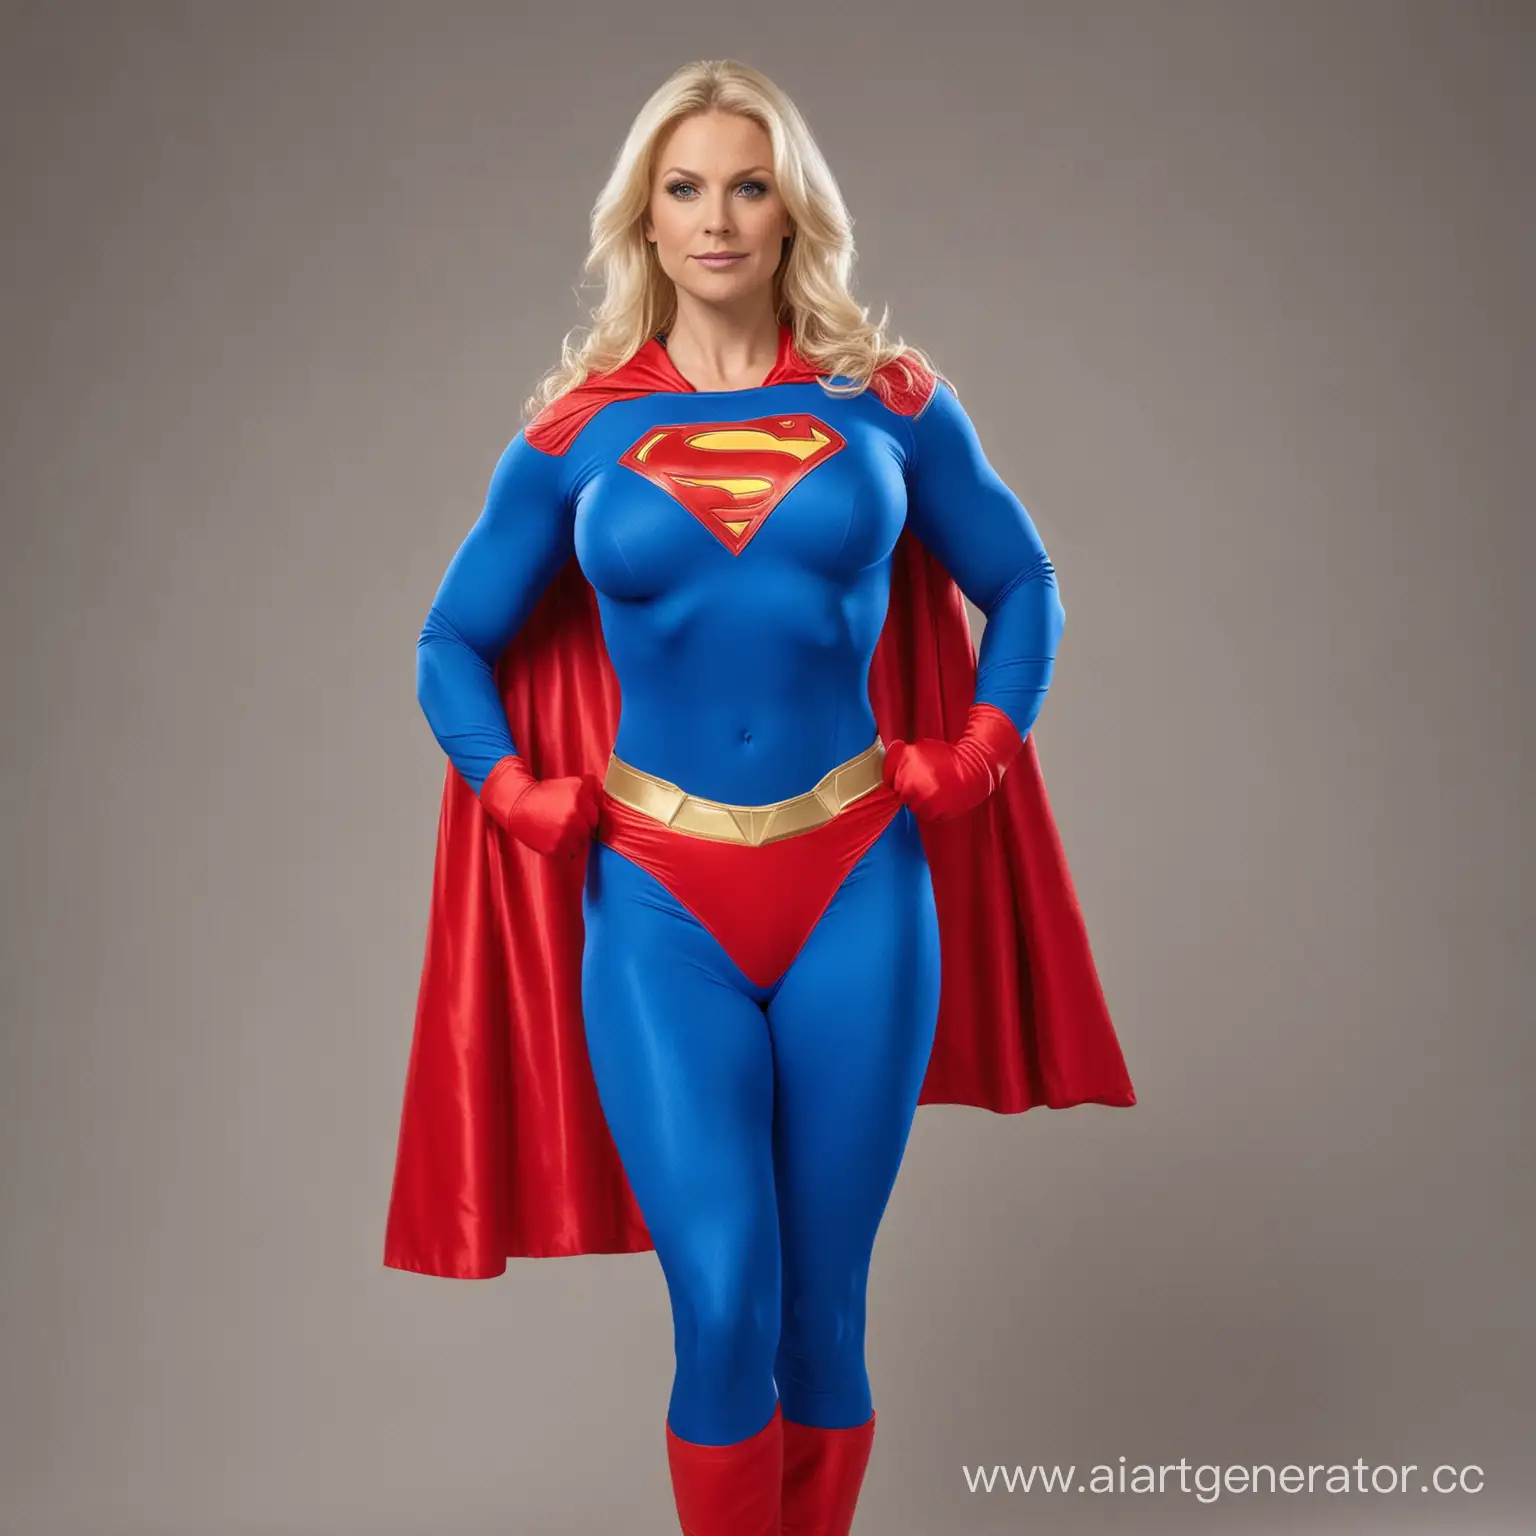 Powerful-Blonde-Superwoman-Flexing-Muscles-in-Bright-Blue-Costume-with-Red-Cape